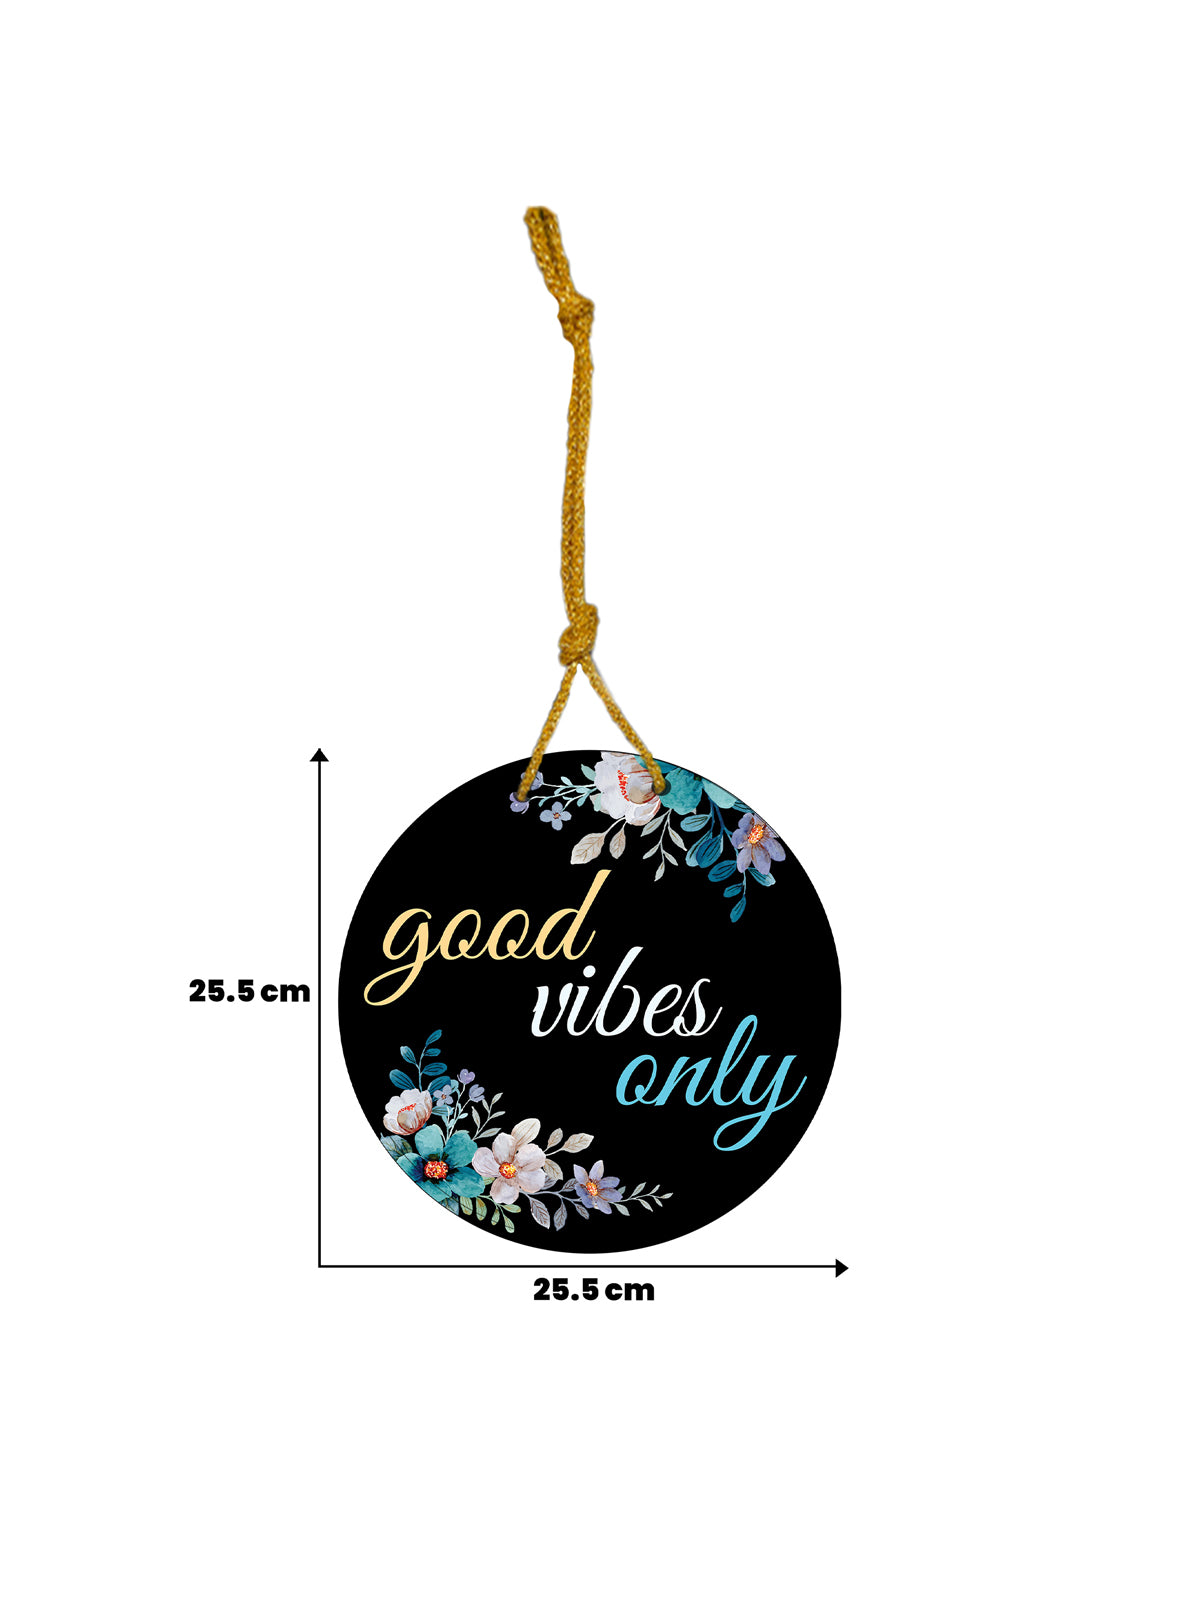 Good Vibes Only Round Wooden Wall Hanging